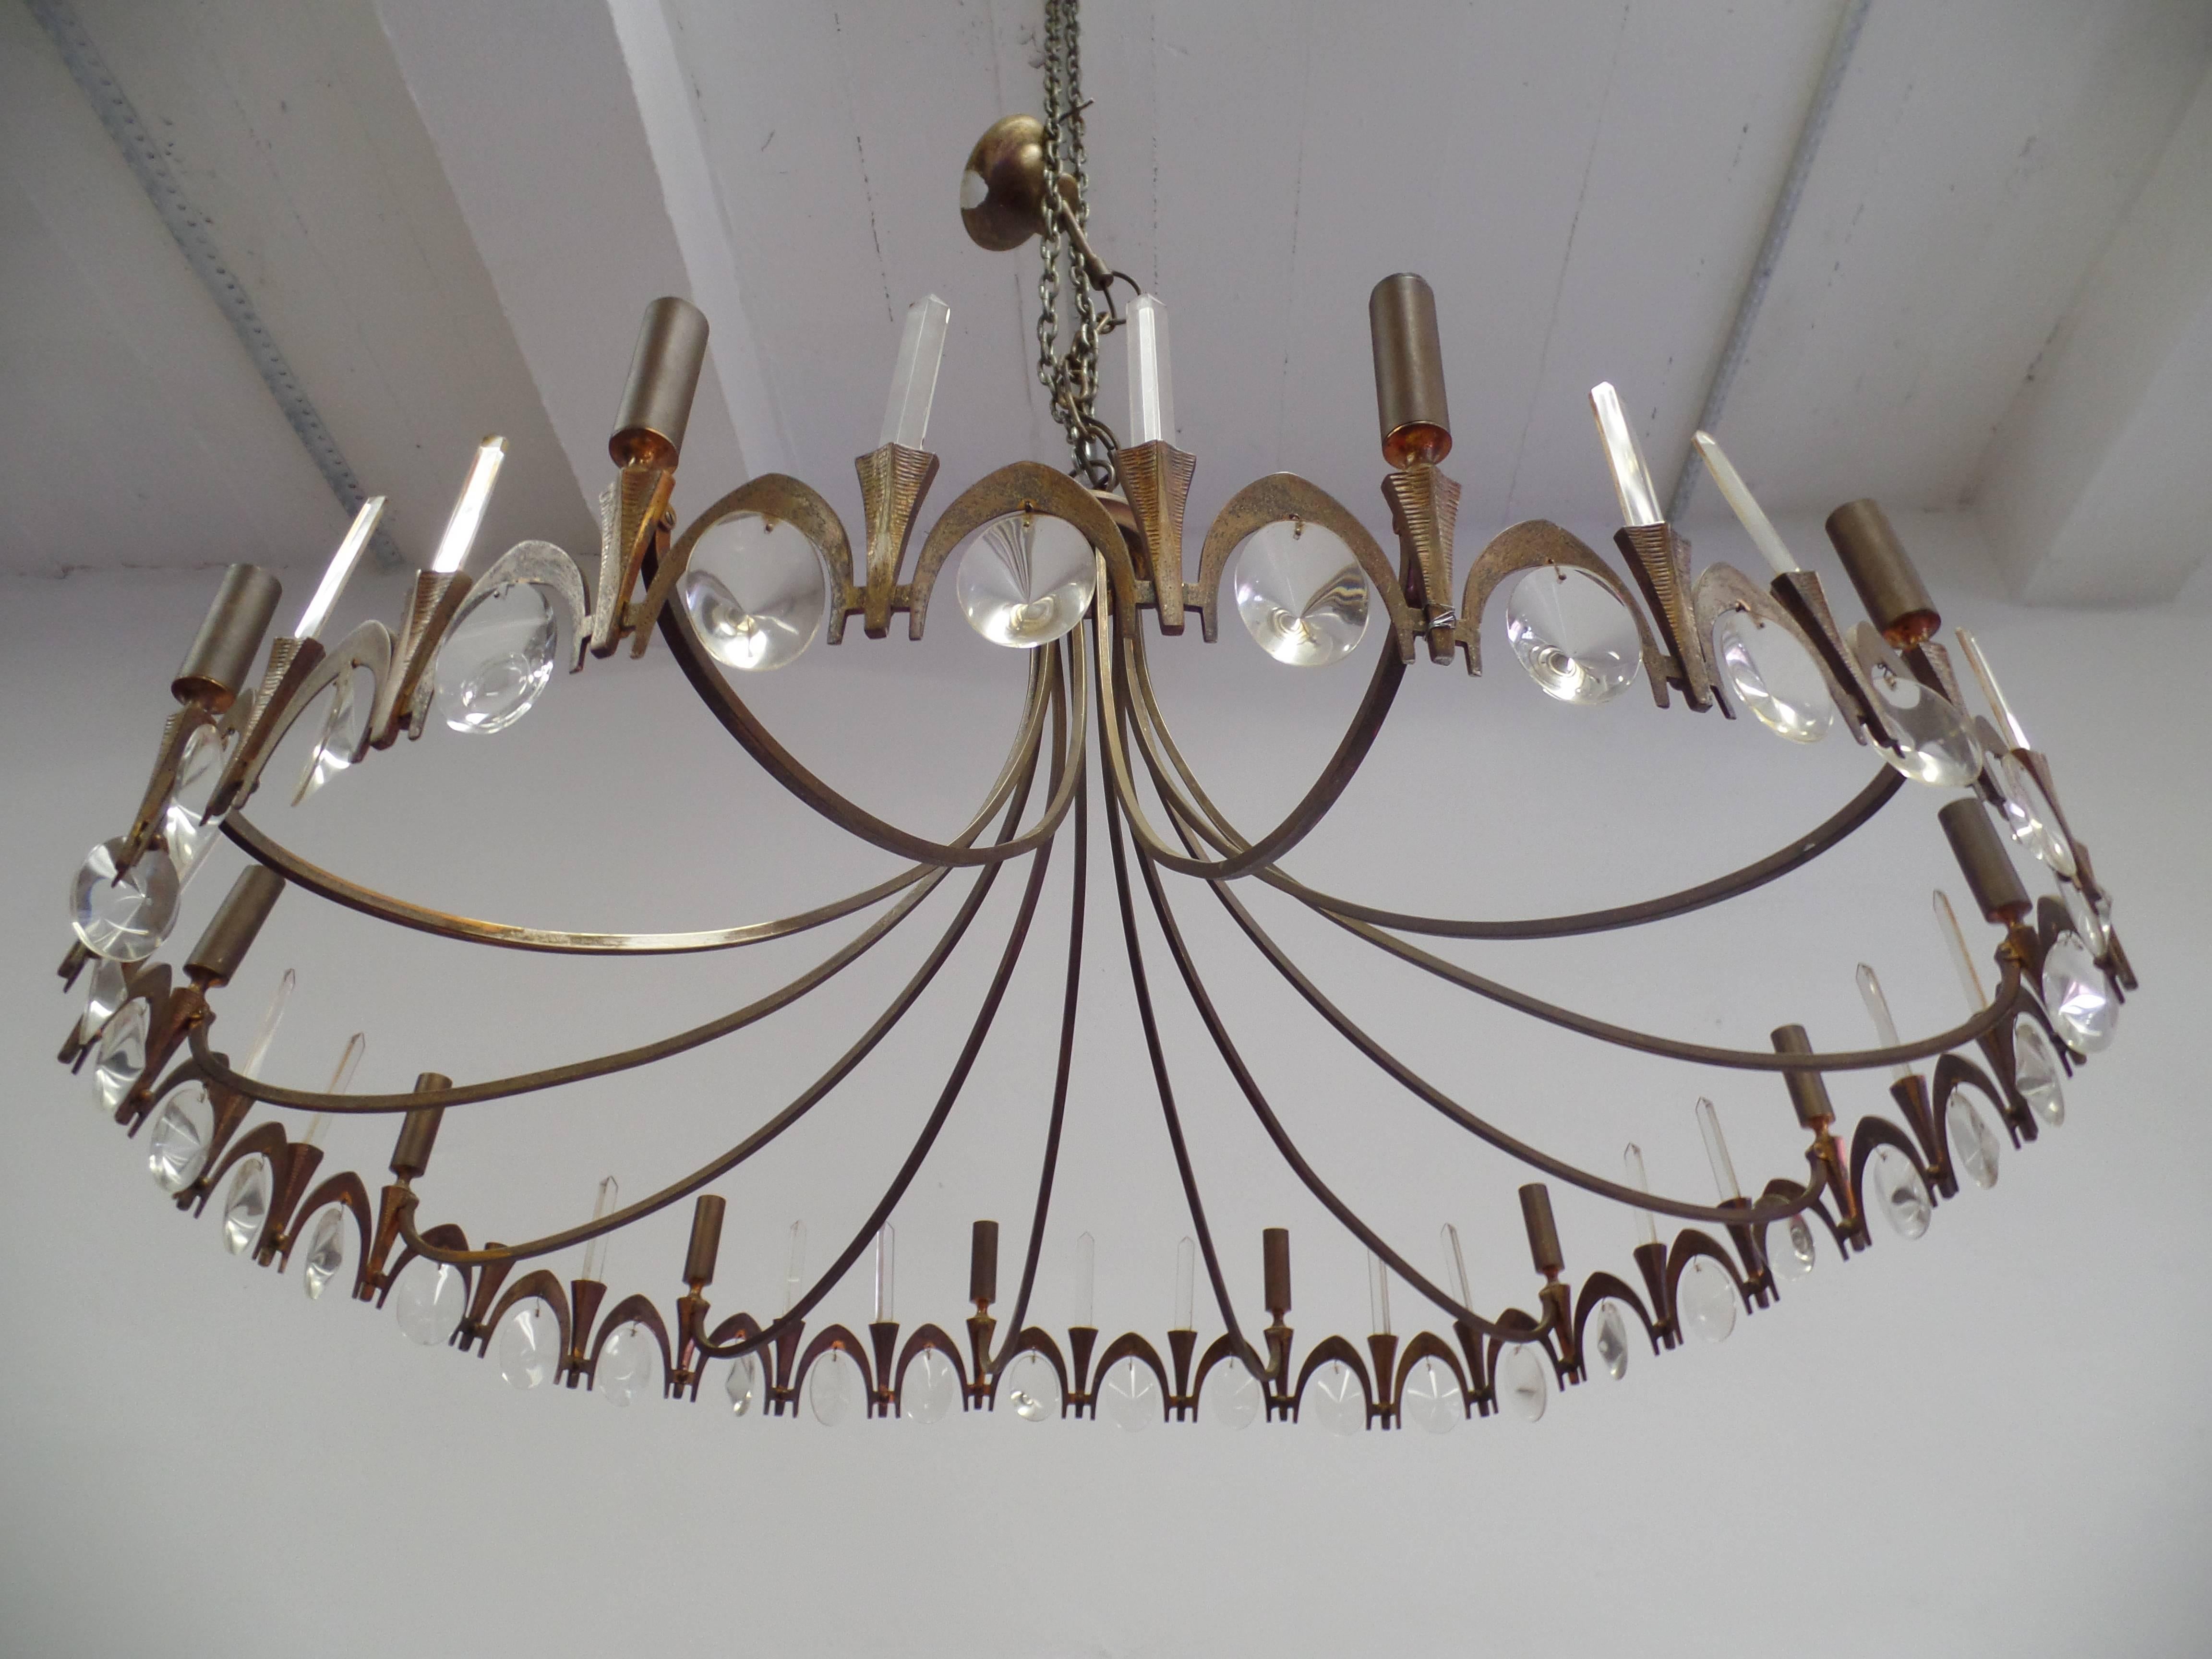 Elegant Italian Mid-Century gilt bronze and crystal chandelier in the Modern Neoclassical spirit.

The gilt bronze frame is arranged in a circle and composed of alternating sober torch forms and arch forms. The torches support candelabra sockets and